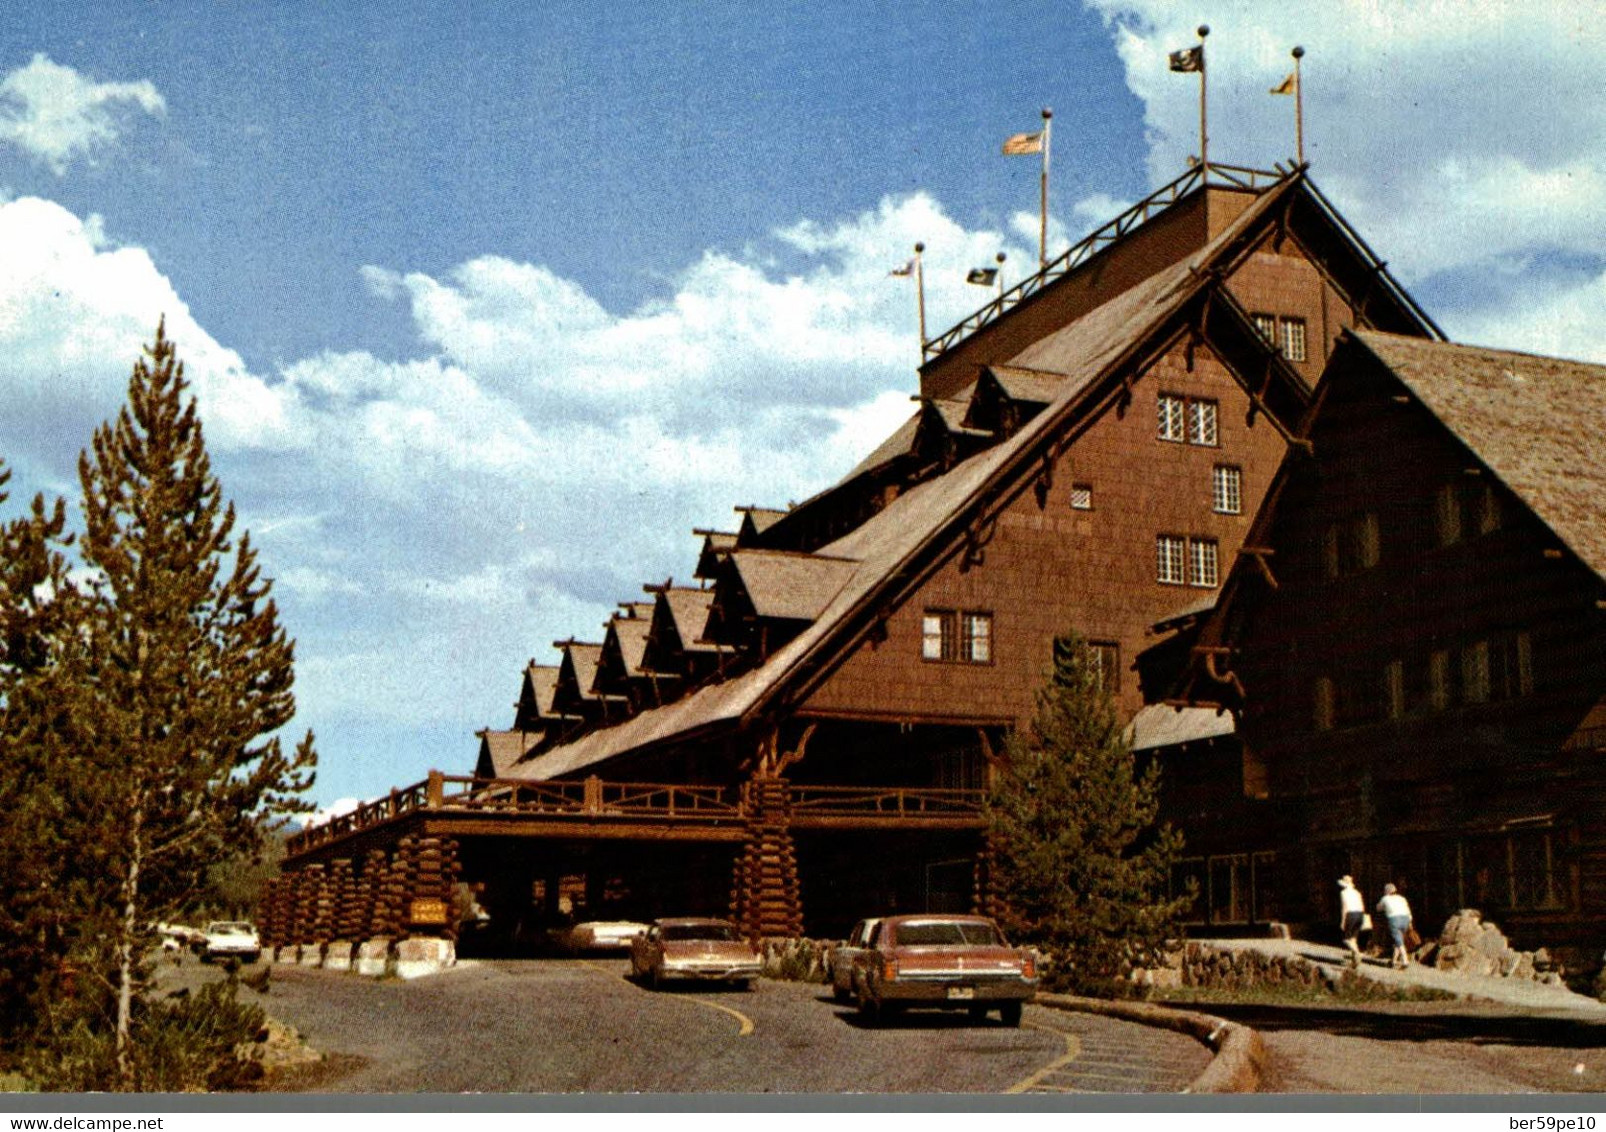 OLD FAITHFUL INN - UPPER GEYSER BASIN / YELLOWSTONE NATIONAL PARK A VIEW OF MAN MADE BEAUTY IN THE PARK - Yellowstone